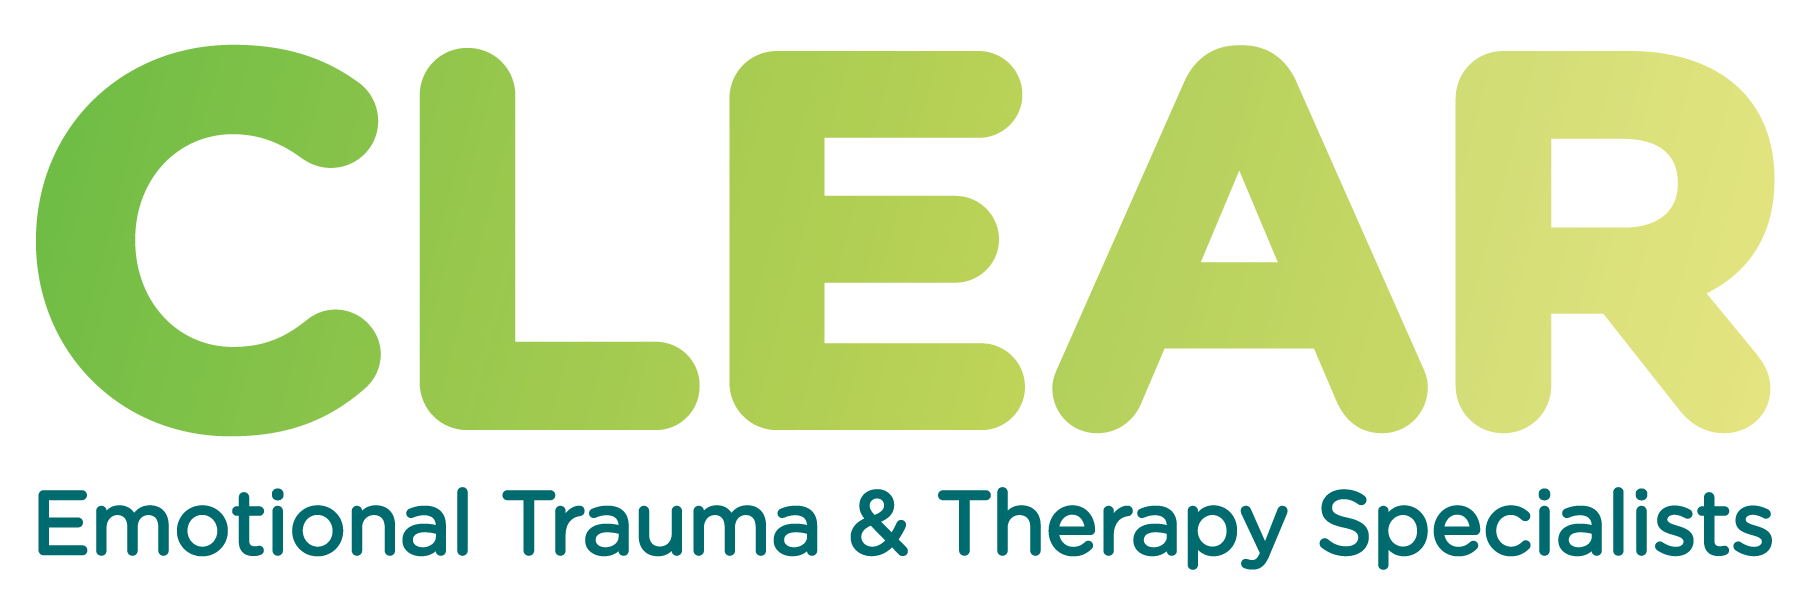 logo for CLEAR Emotional Trauma and Therapy Specialists